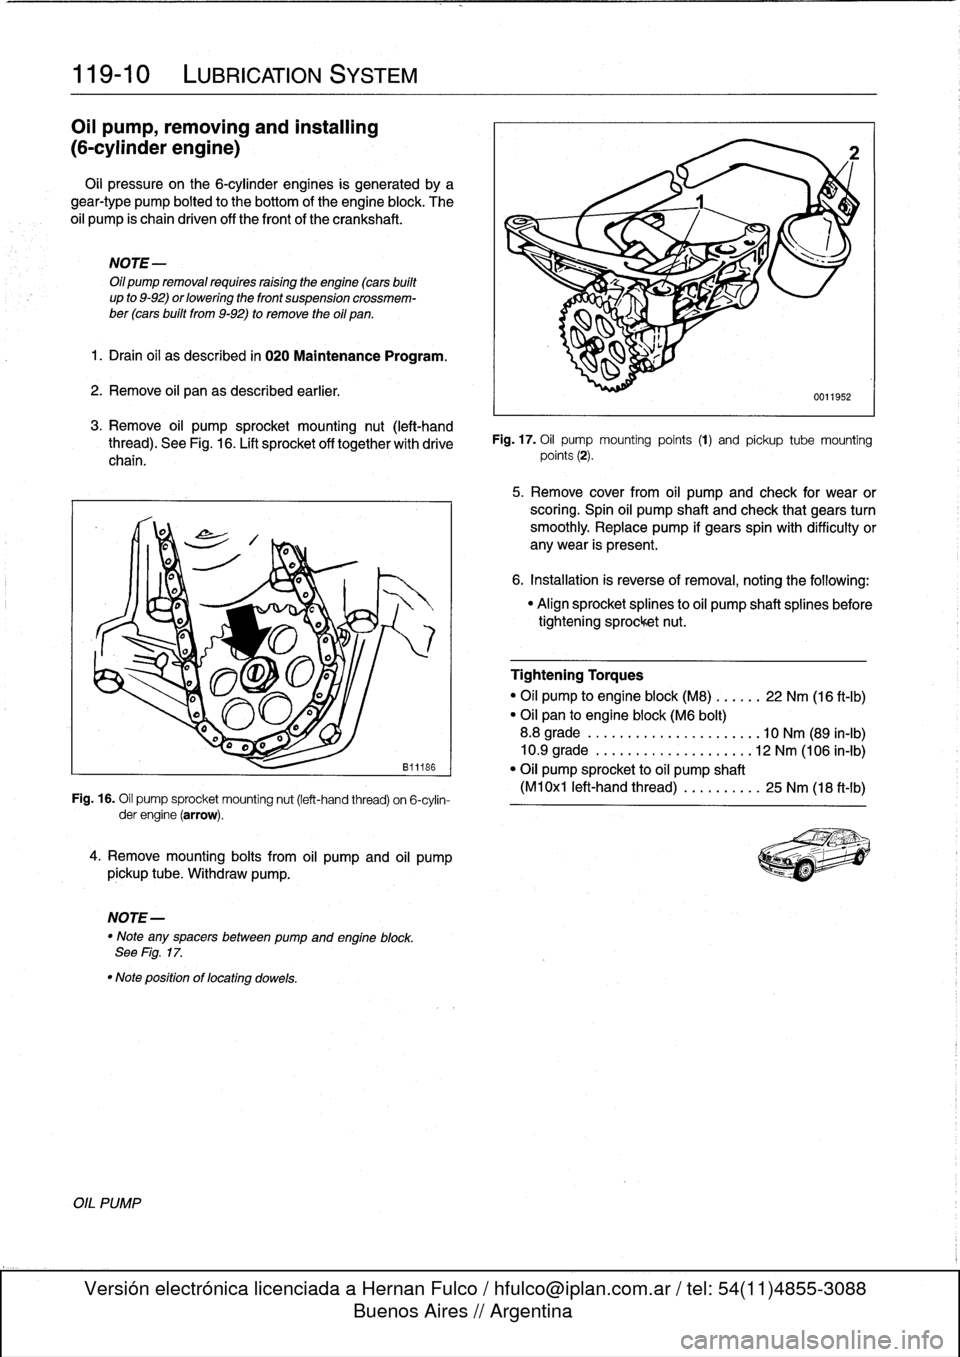 BMW M3 1998 E36 User Guide 
119-
1
0

	

LUBRICATION
SYSTEM

Oil
pump,
removing
and
installing

(6-cylinder
engine)

Oil
pressure
on
the
6-cylinder
engines
is
generated
by
a
gear-type
pump
bolted
to
the
bottom
of
the
engine
blo